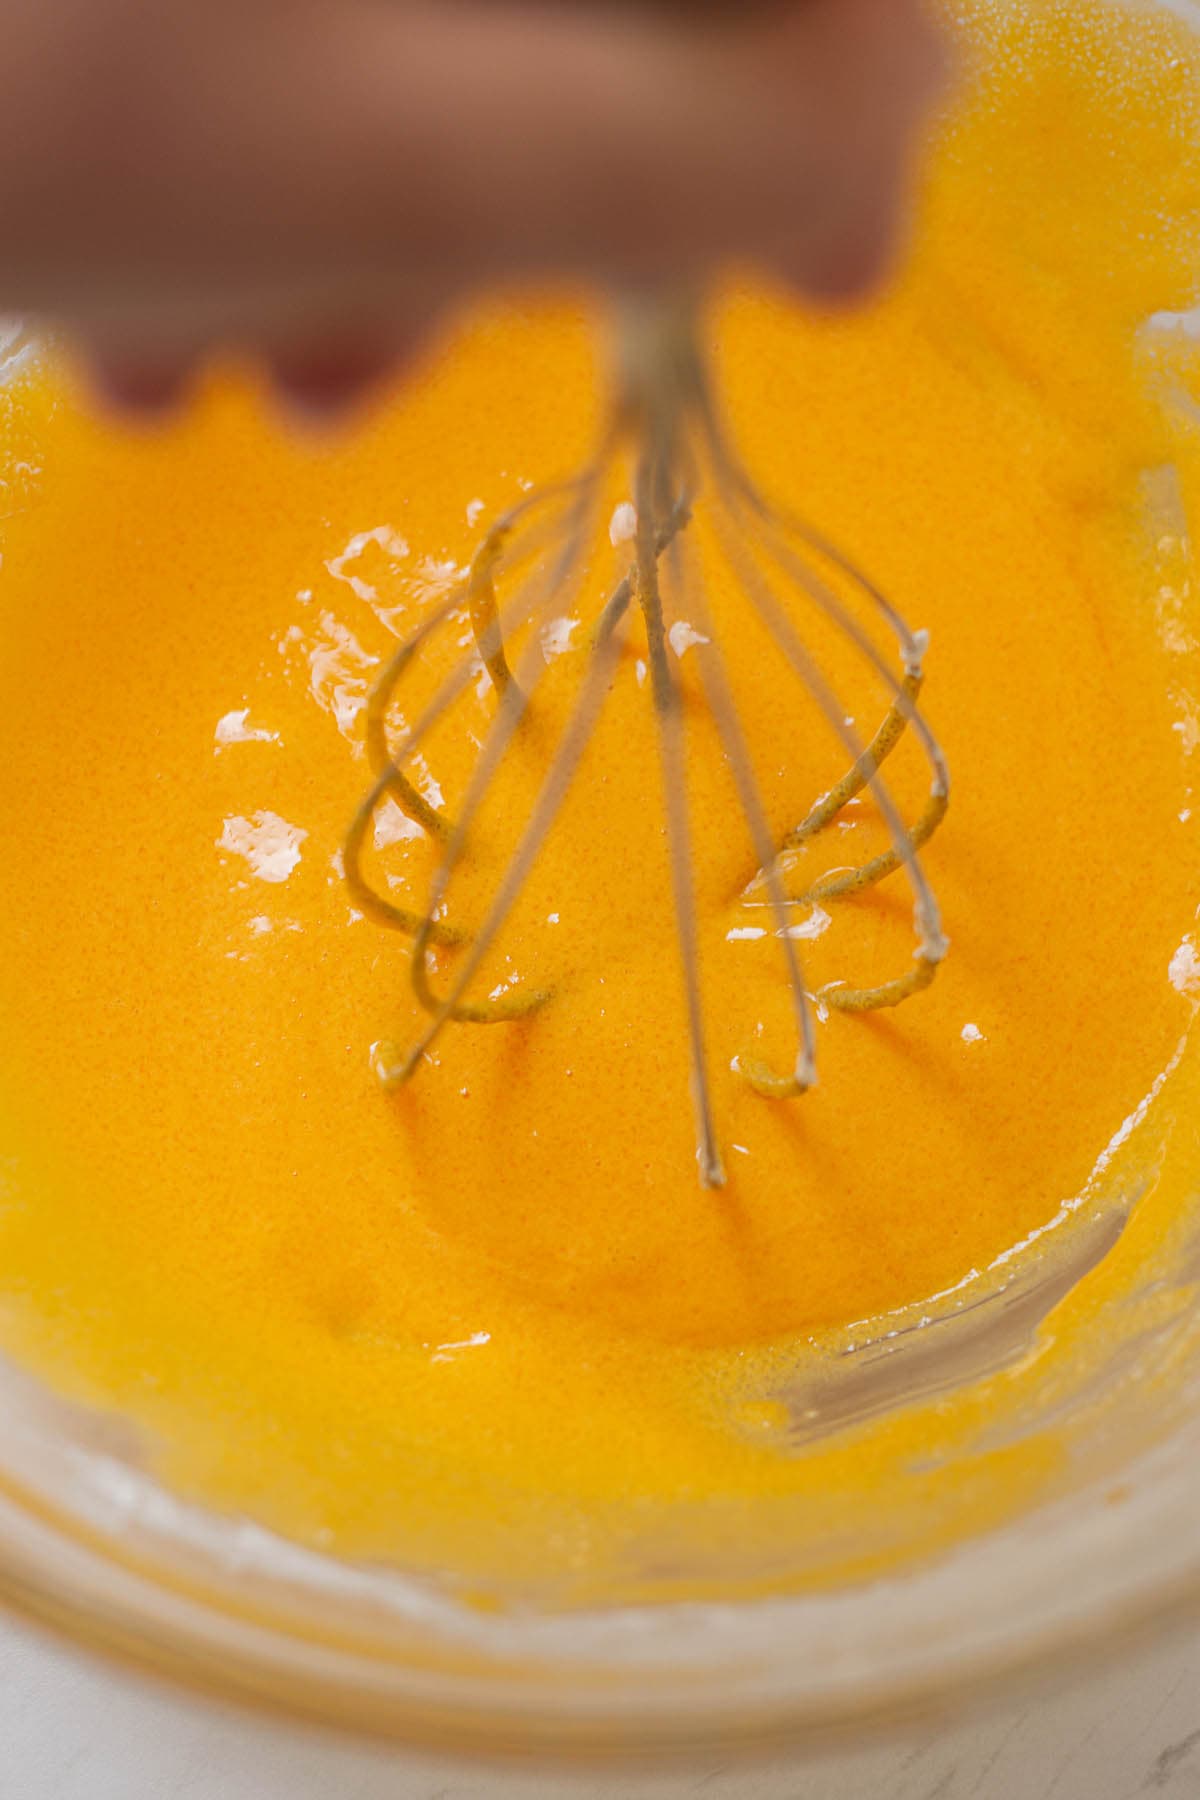 whipped egg yolks in a glass bowl.